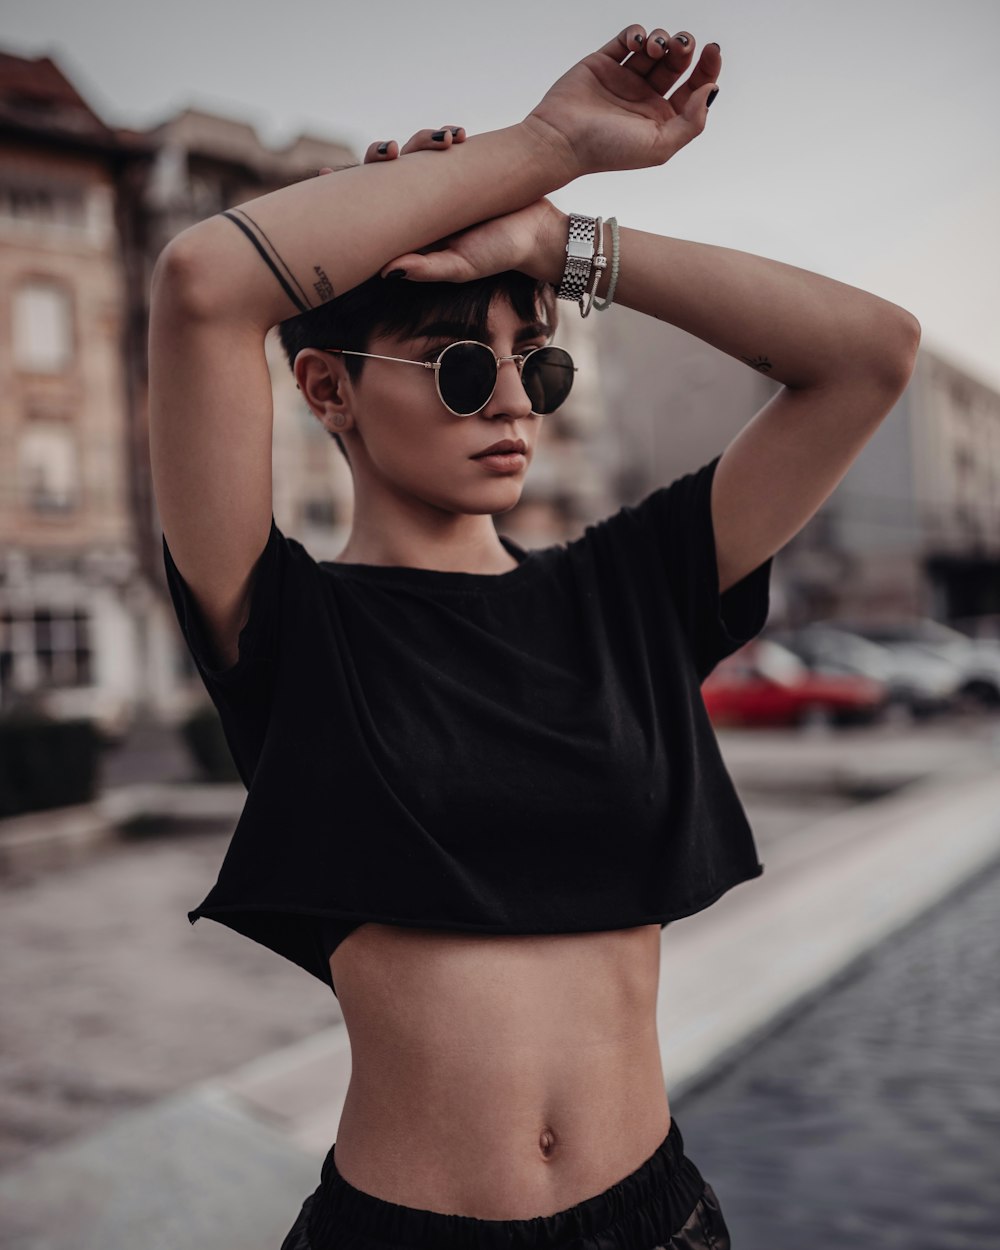 a woman wearing sunglasses and a black top